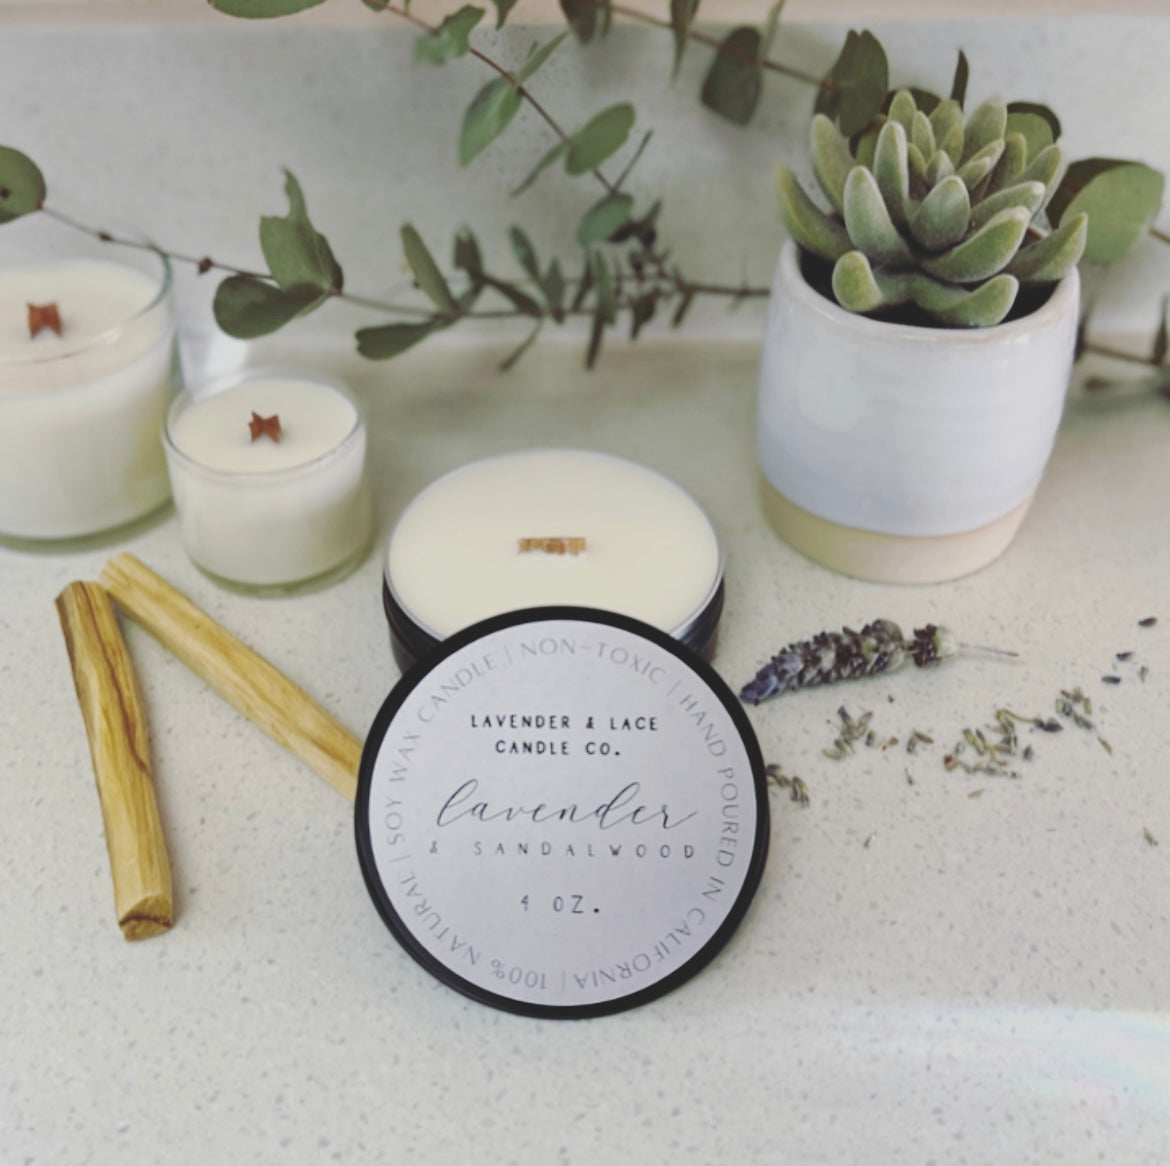 Lavender and Sandalwood Natural Soy Wax Candle